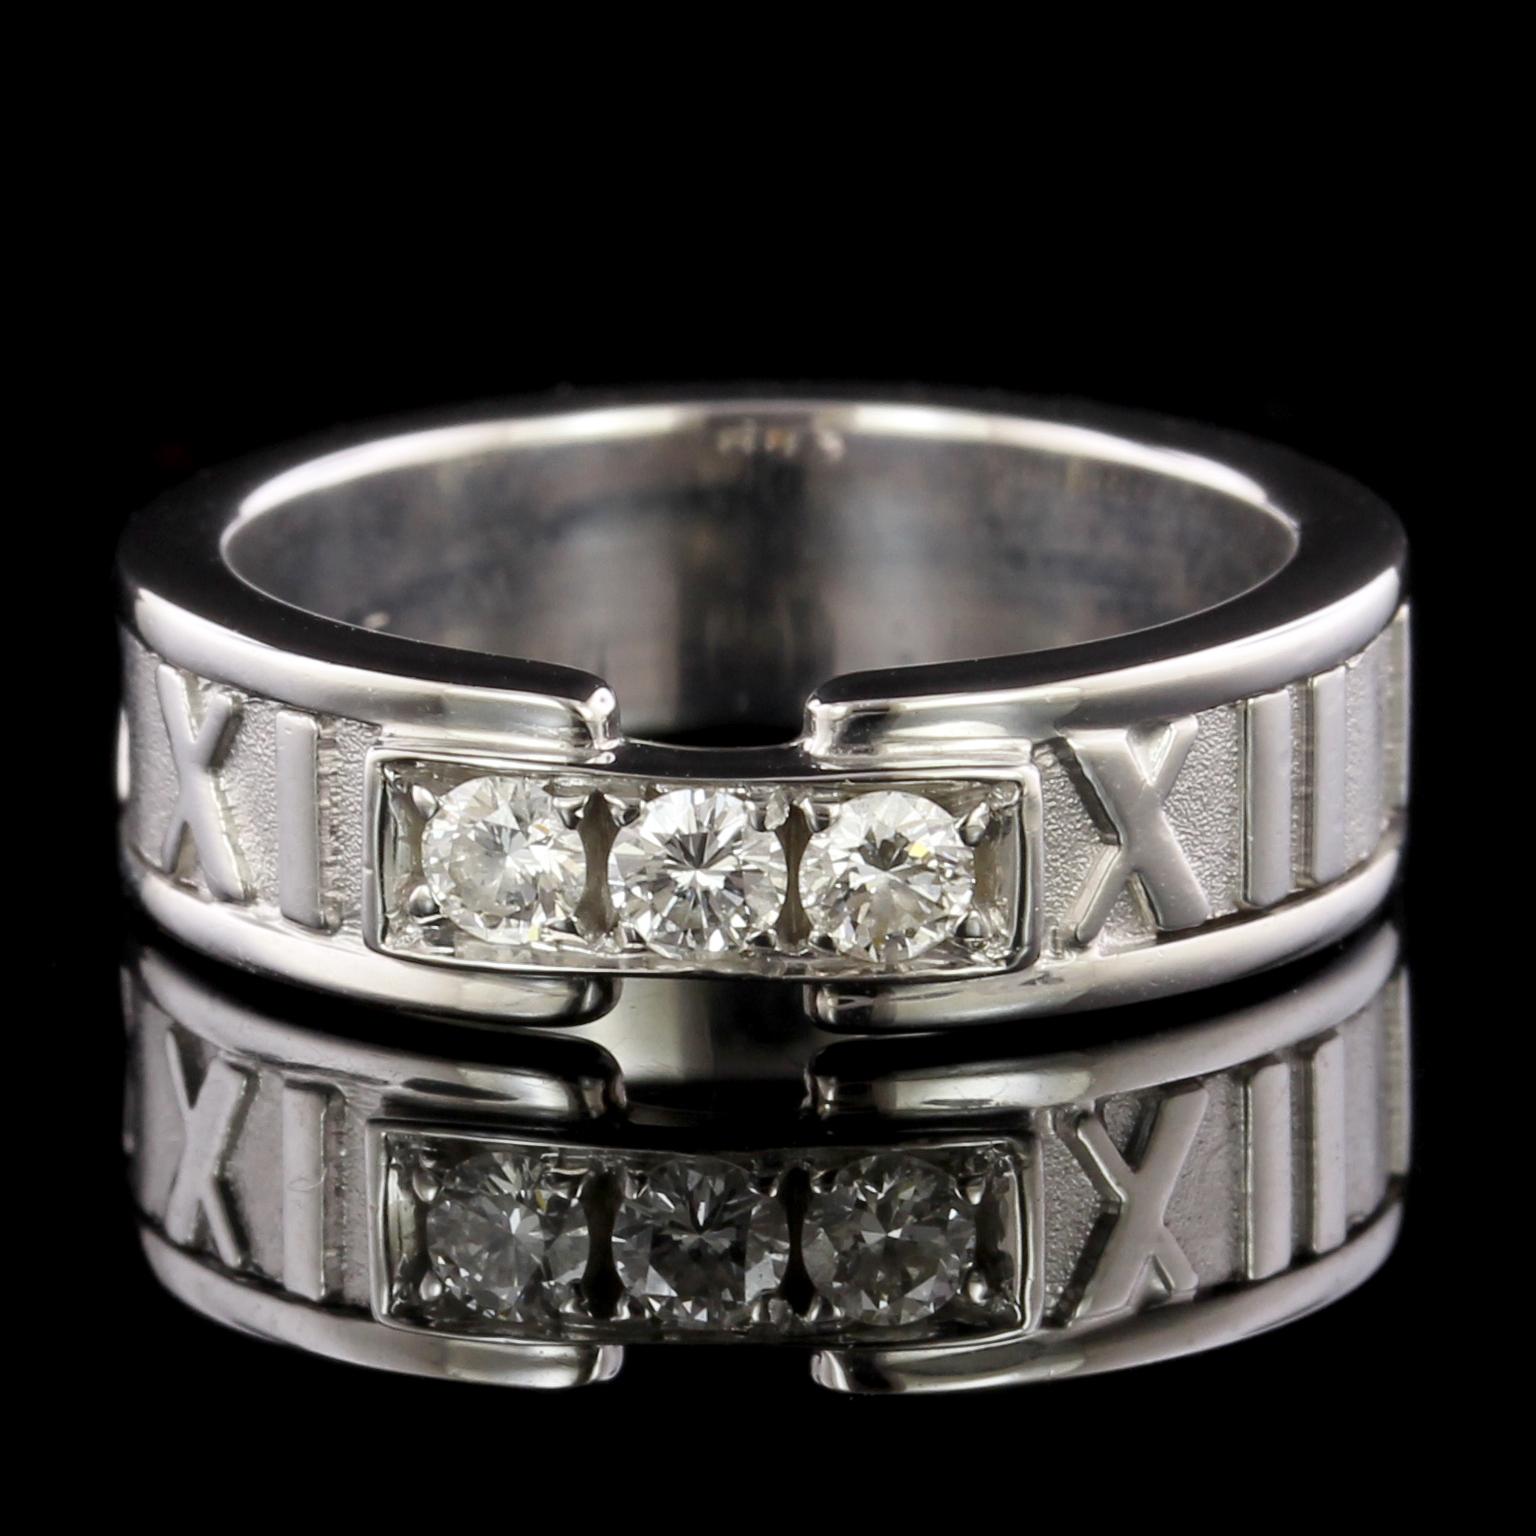 Tiffany & Co. 18K White Gold Diamond Atlas Ring. The ring is set with three full
cut diamonds, approx. total wt. .15cts., F color, VS clarity, size 5, circa 1995, with original
box.